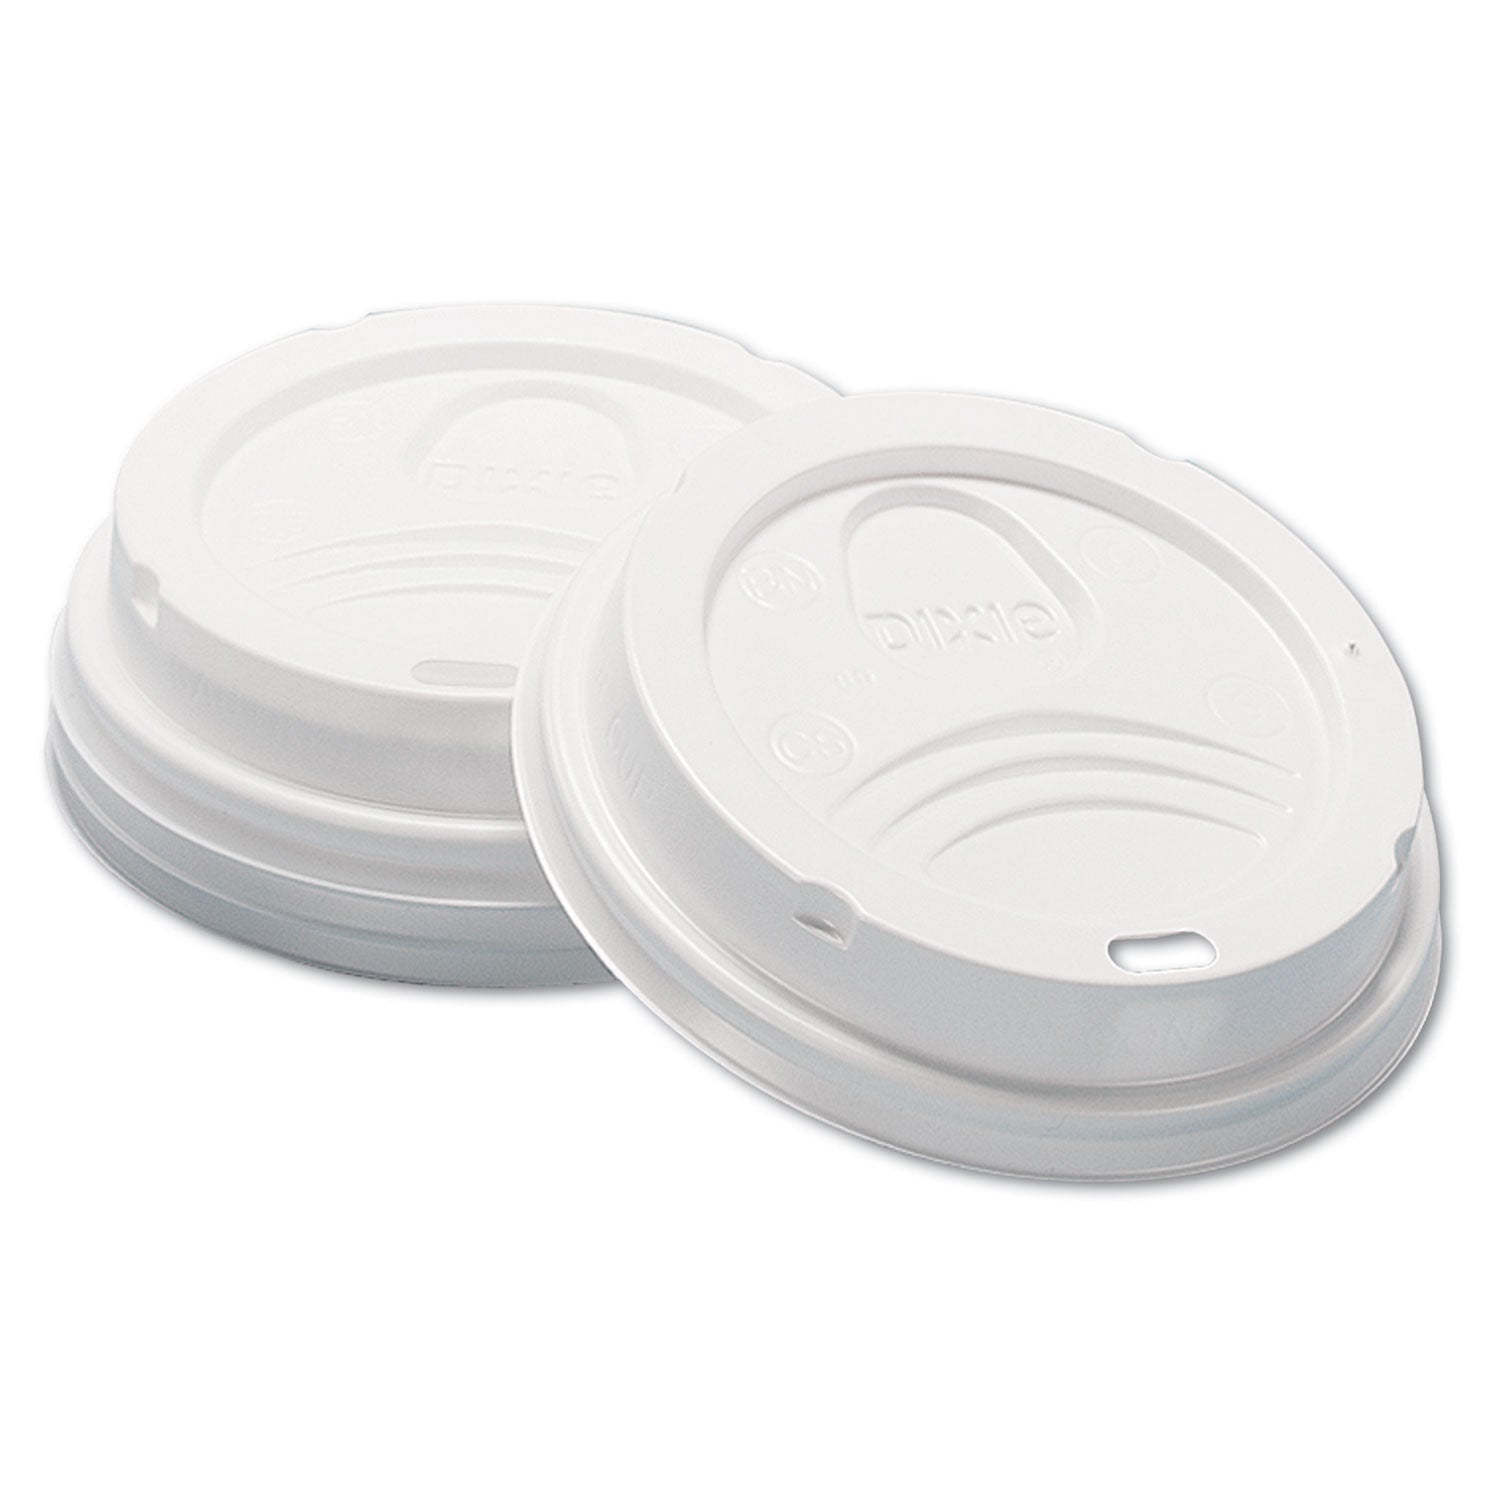 Dome Hot Drink Lids, Fits 8 oz Cups, White, 100/Sleeve, 10 Sleeves/Carton - 